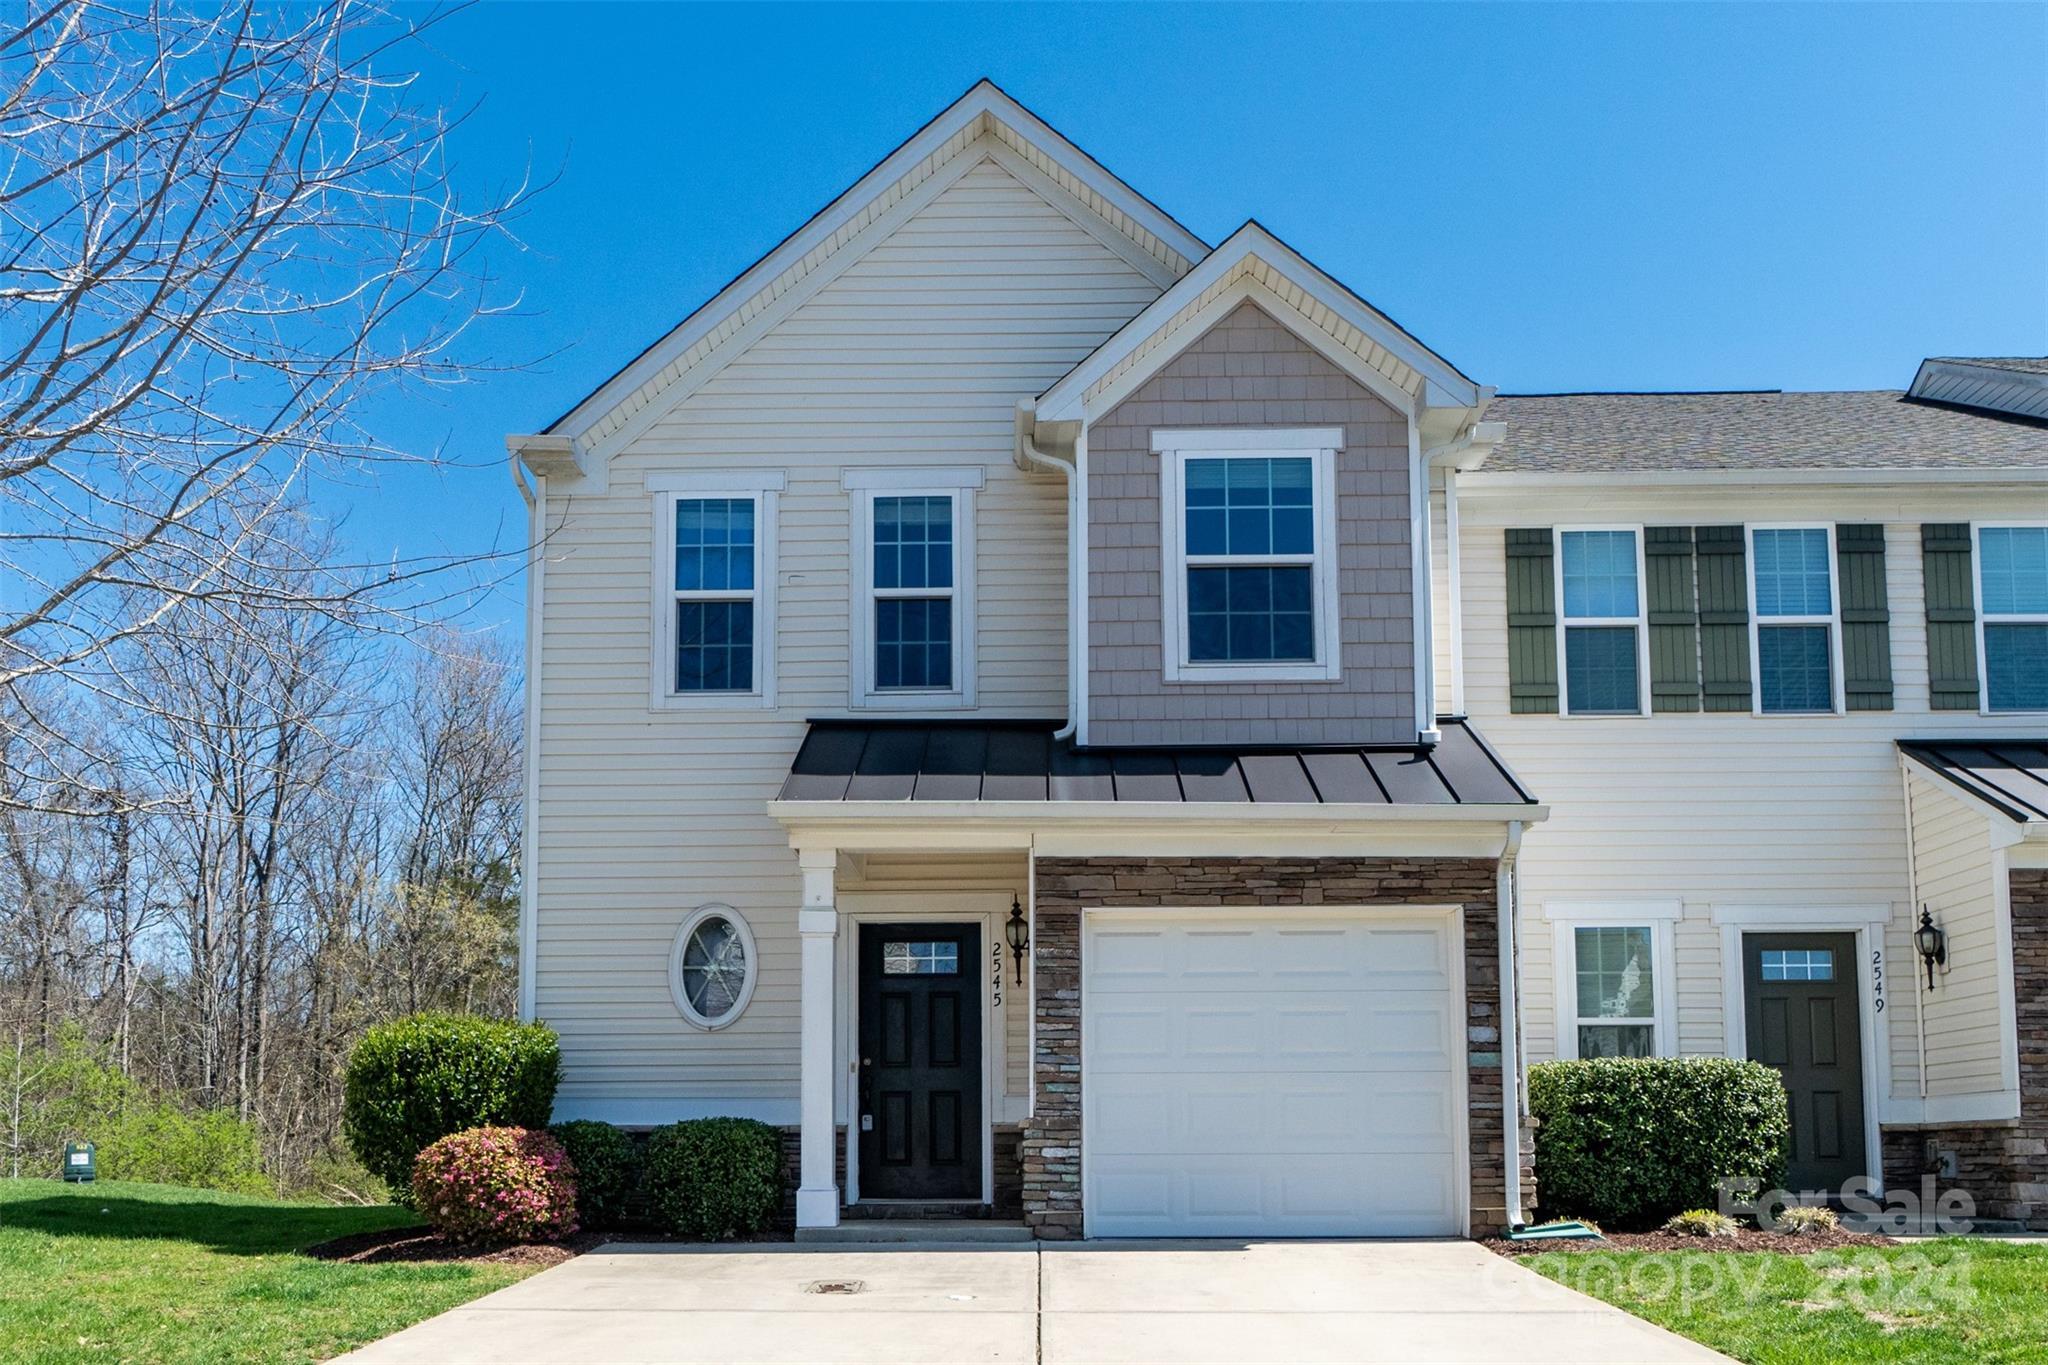 Photo one of 2545 Silverthorn Dr # 86 Charlotte NC 28273 | MLS 4121048